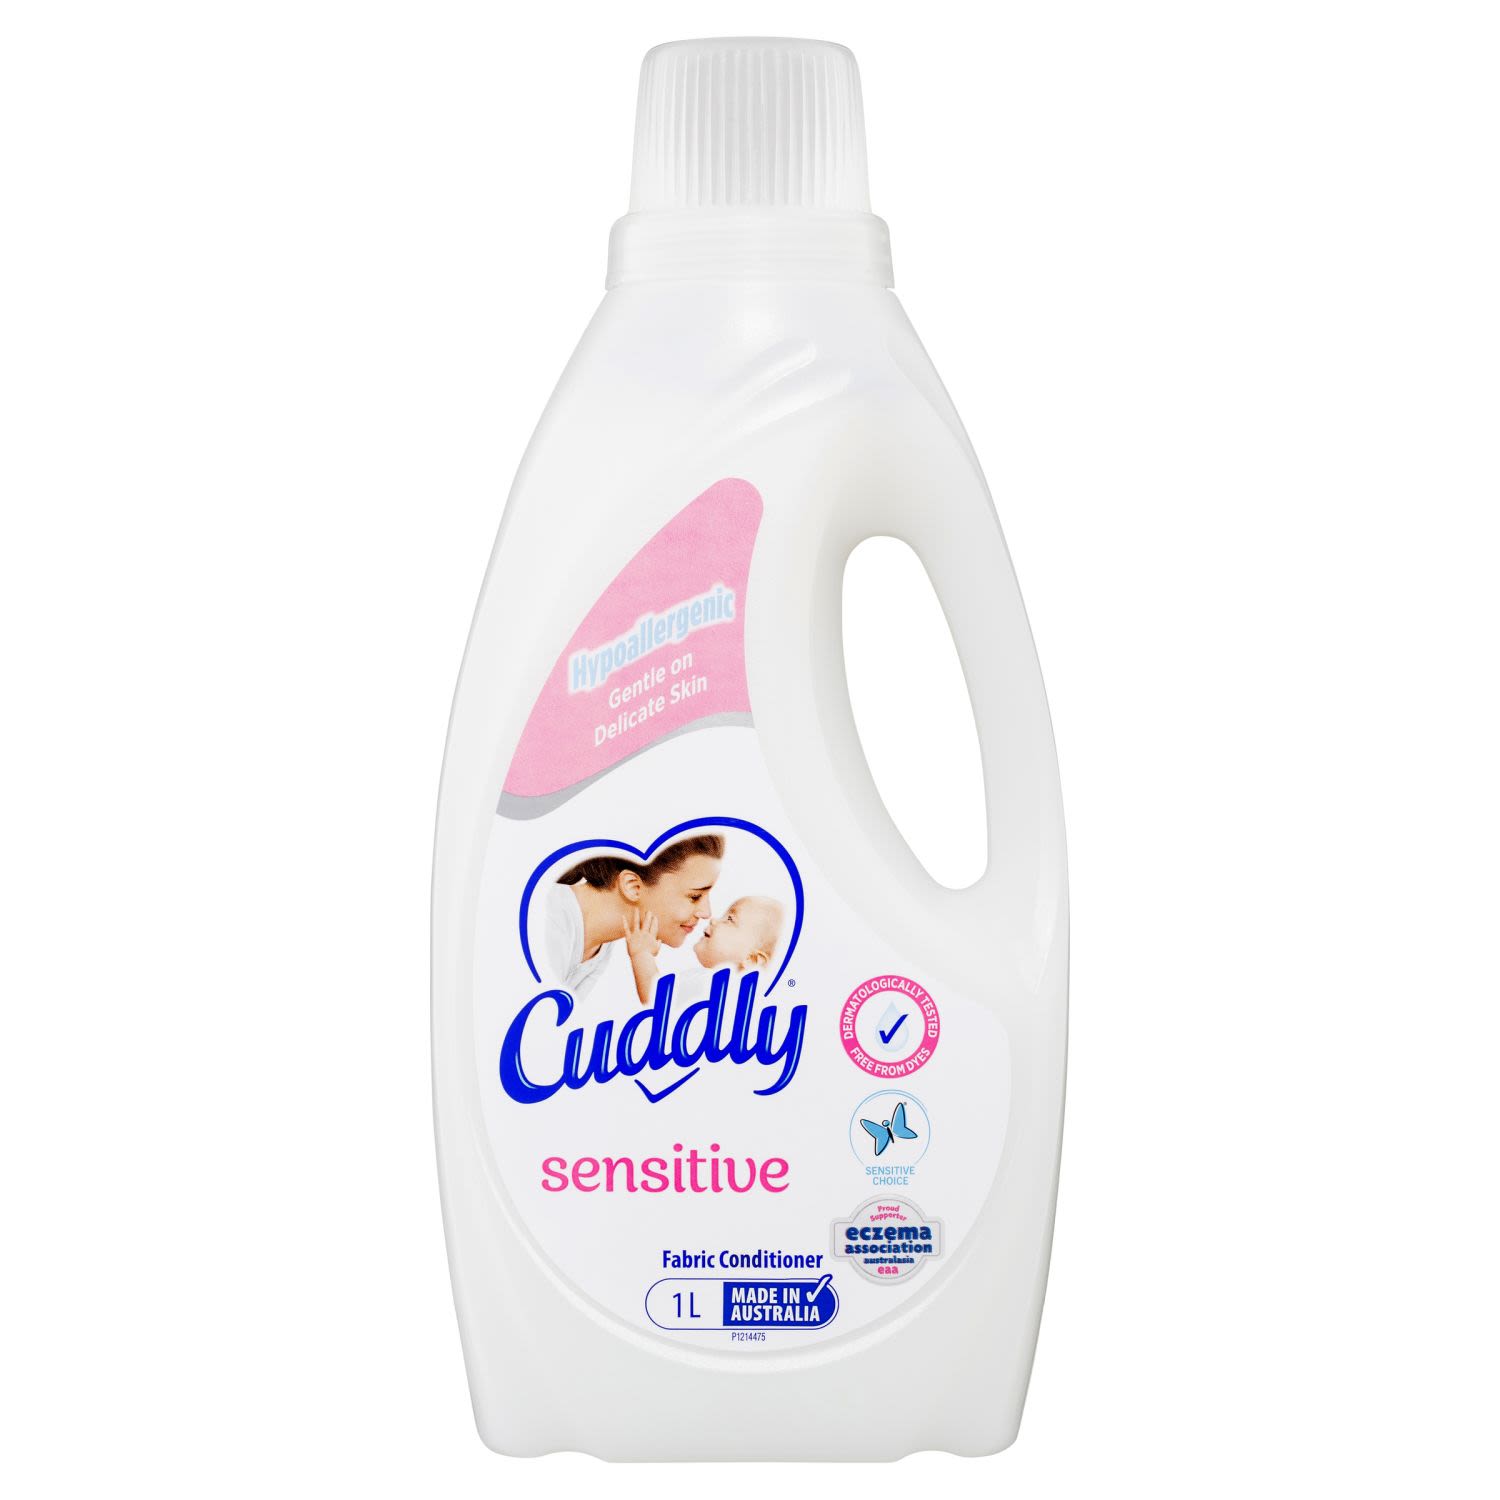 Cuddly Fabric Softener Conditioner Sensitive Hypoallergenic & Dermatologically Tested, 1 Litre